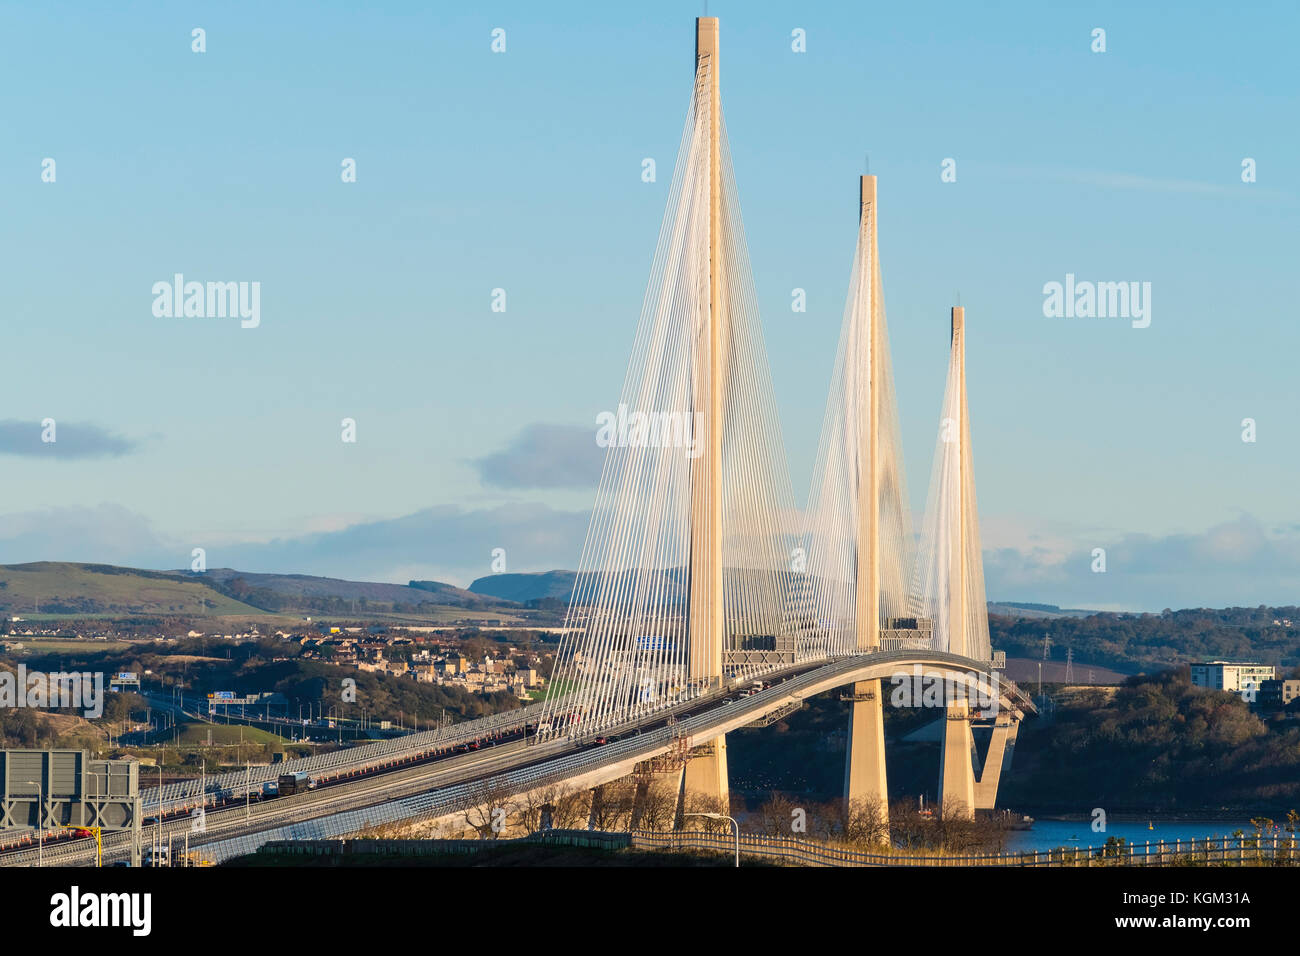 View of new Queensferry Crossing bridge spanning the Firth of Forth between West Lothian and Fife in Scotland, United Kingdom. Stock Photo